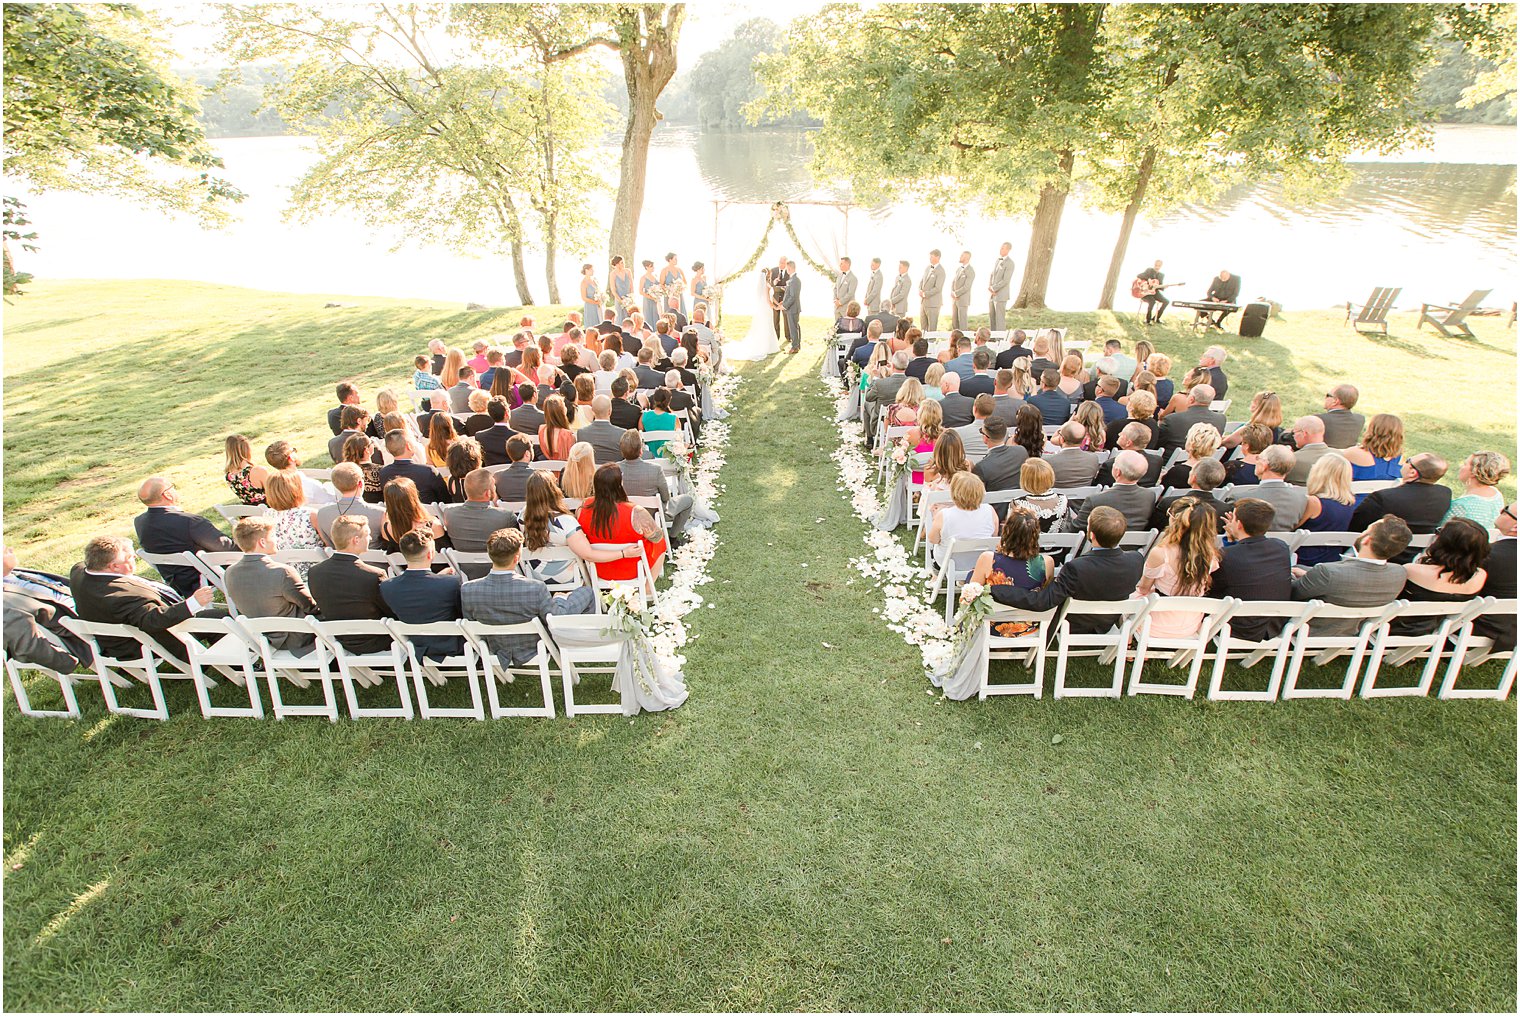 Outdoor ceremony at Indian Trail Club in Franklin Lakes, NJ